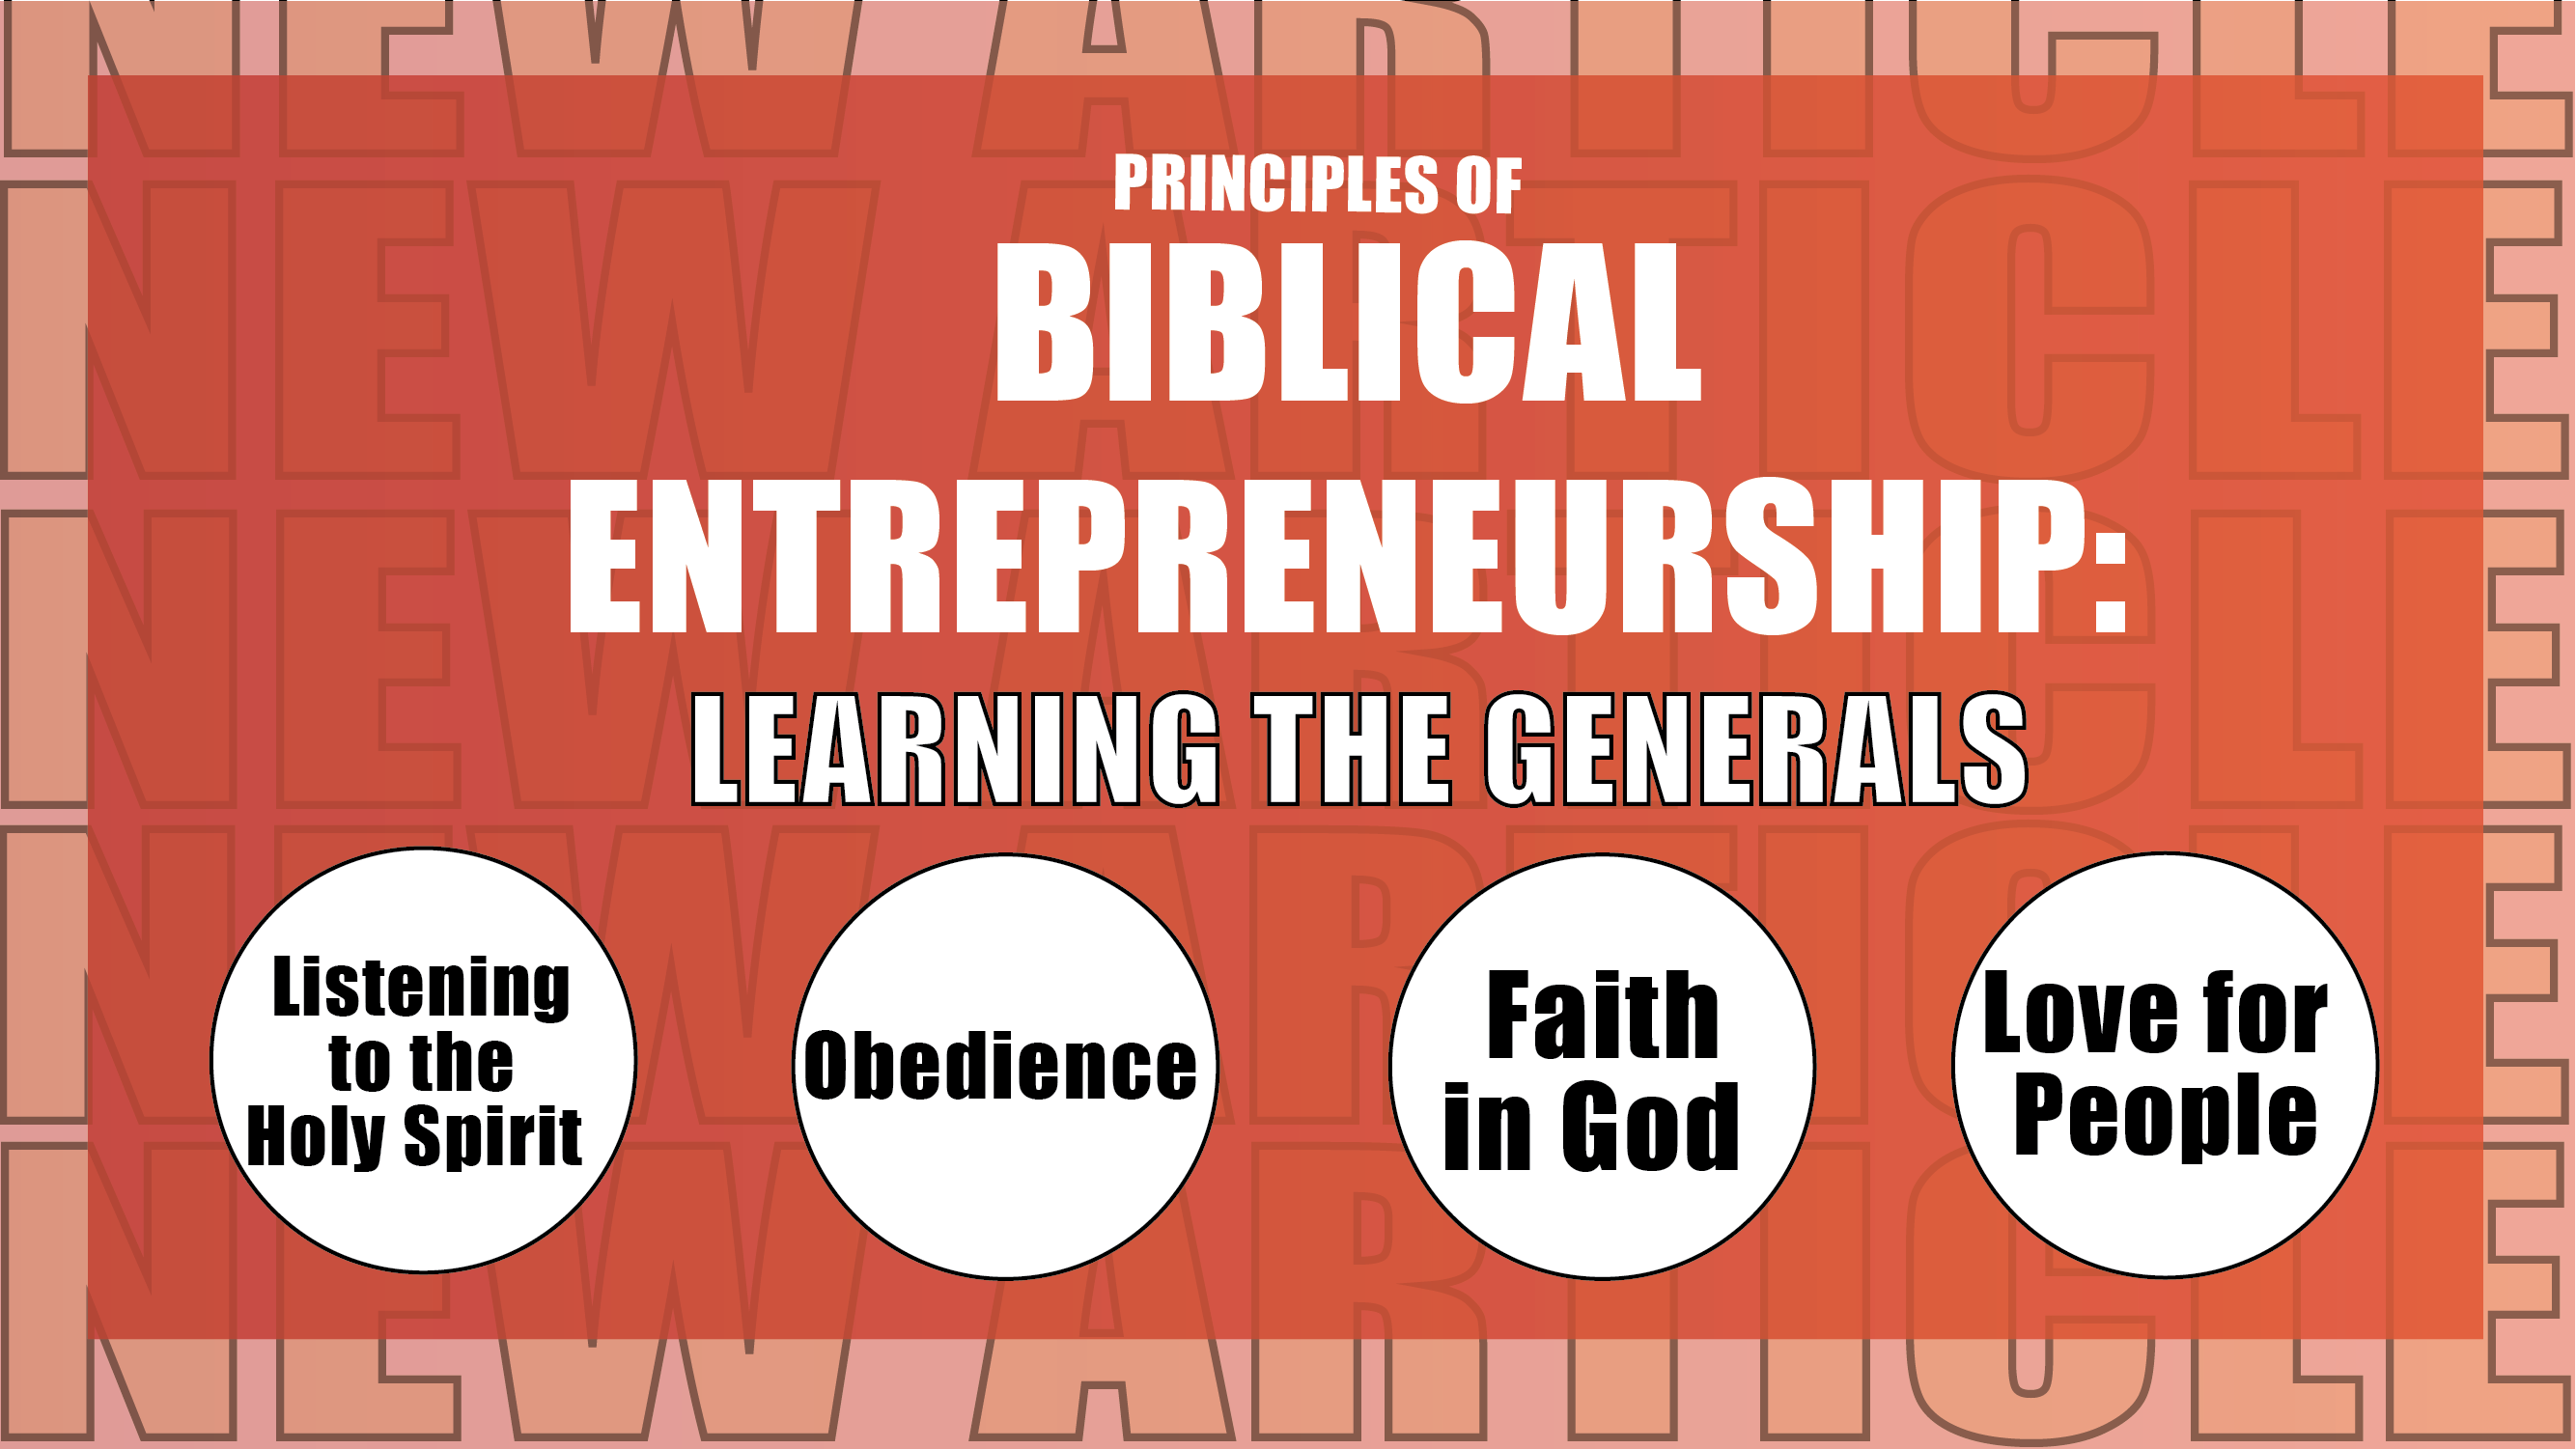 Principles of Biblical Entrepreneurship: Learning from the Generals